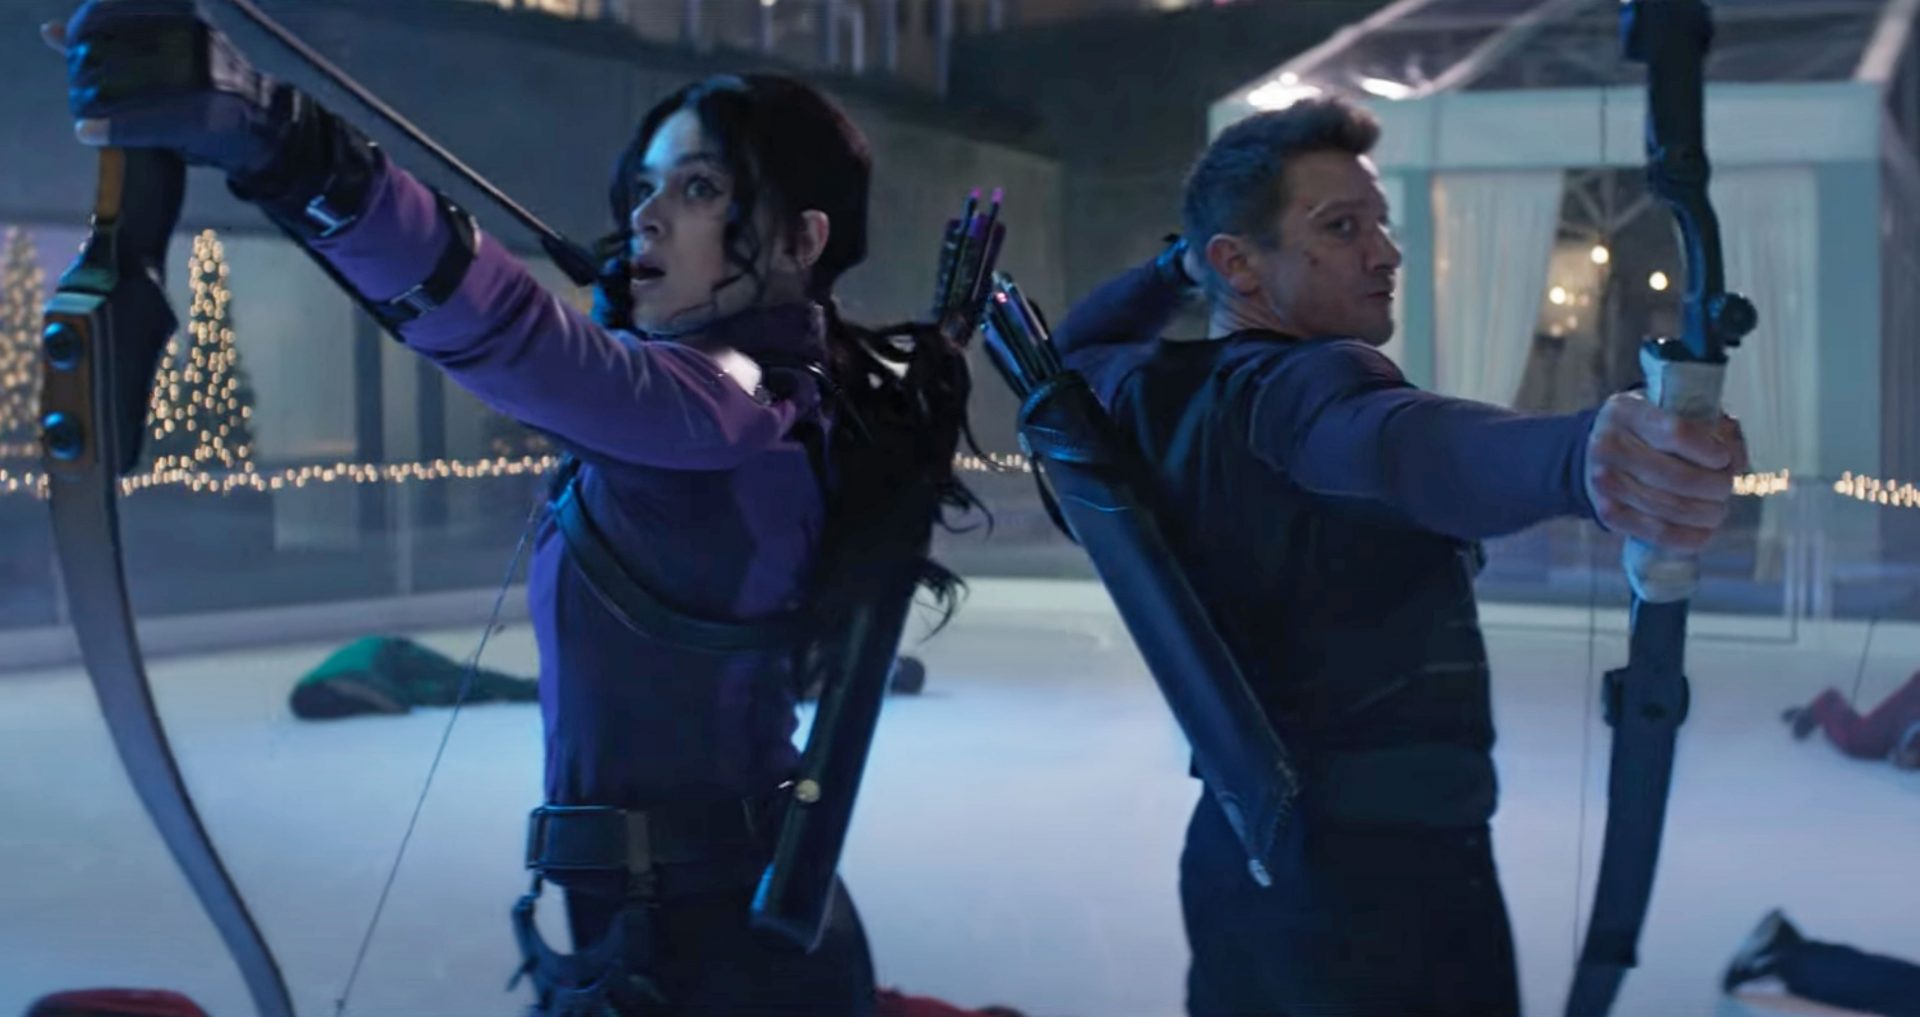 Disney+ ‘Hawkeye’ trailer presentations Clint Barton’s past catching up with him